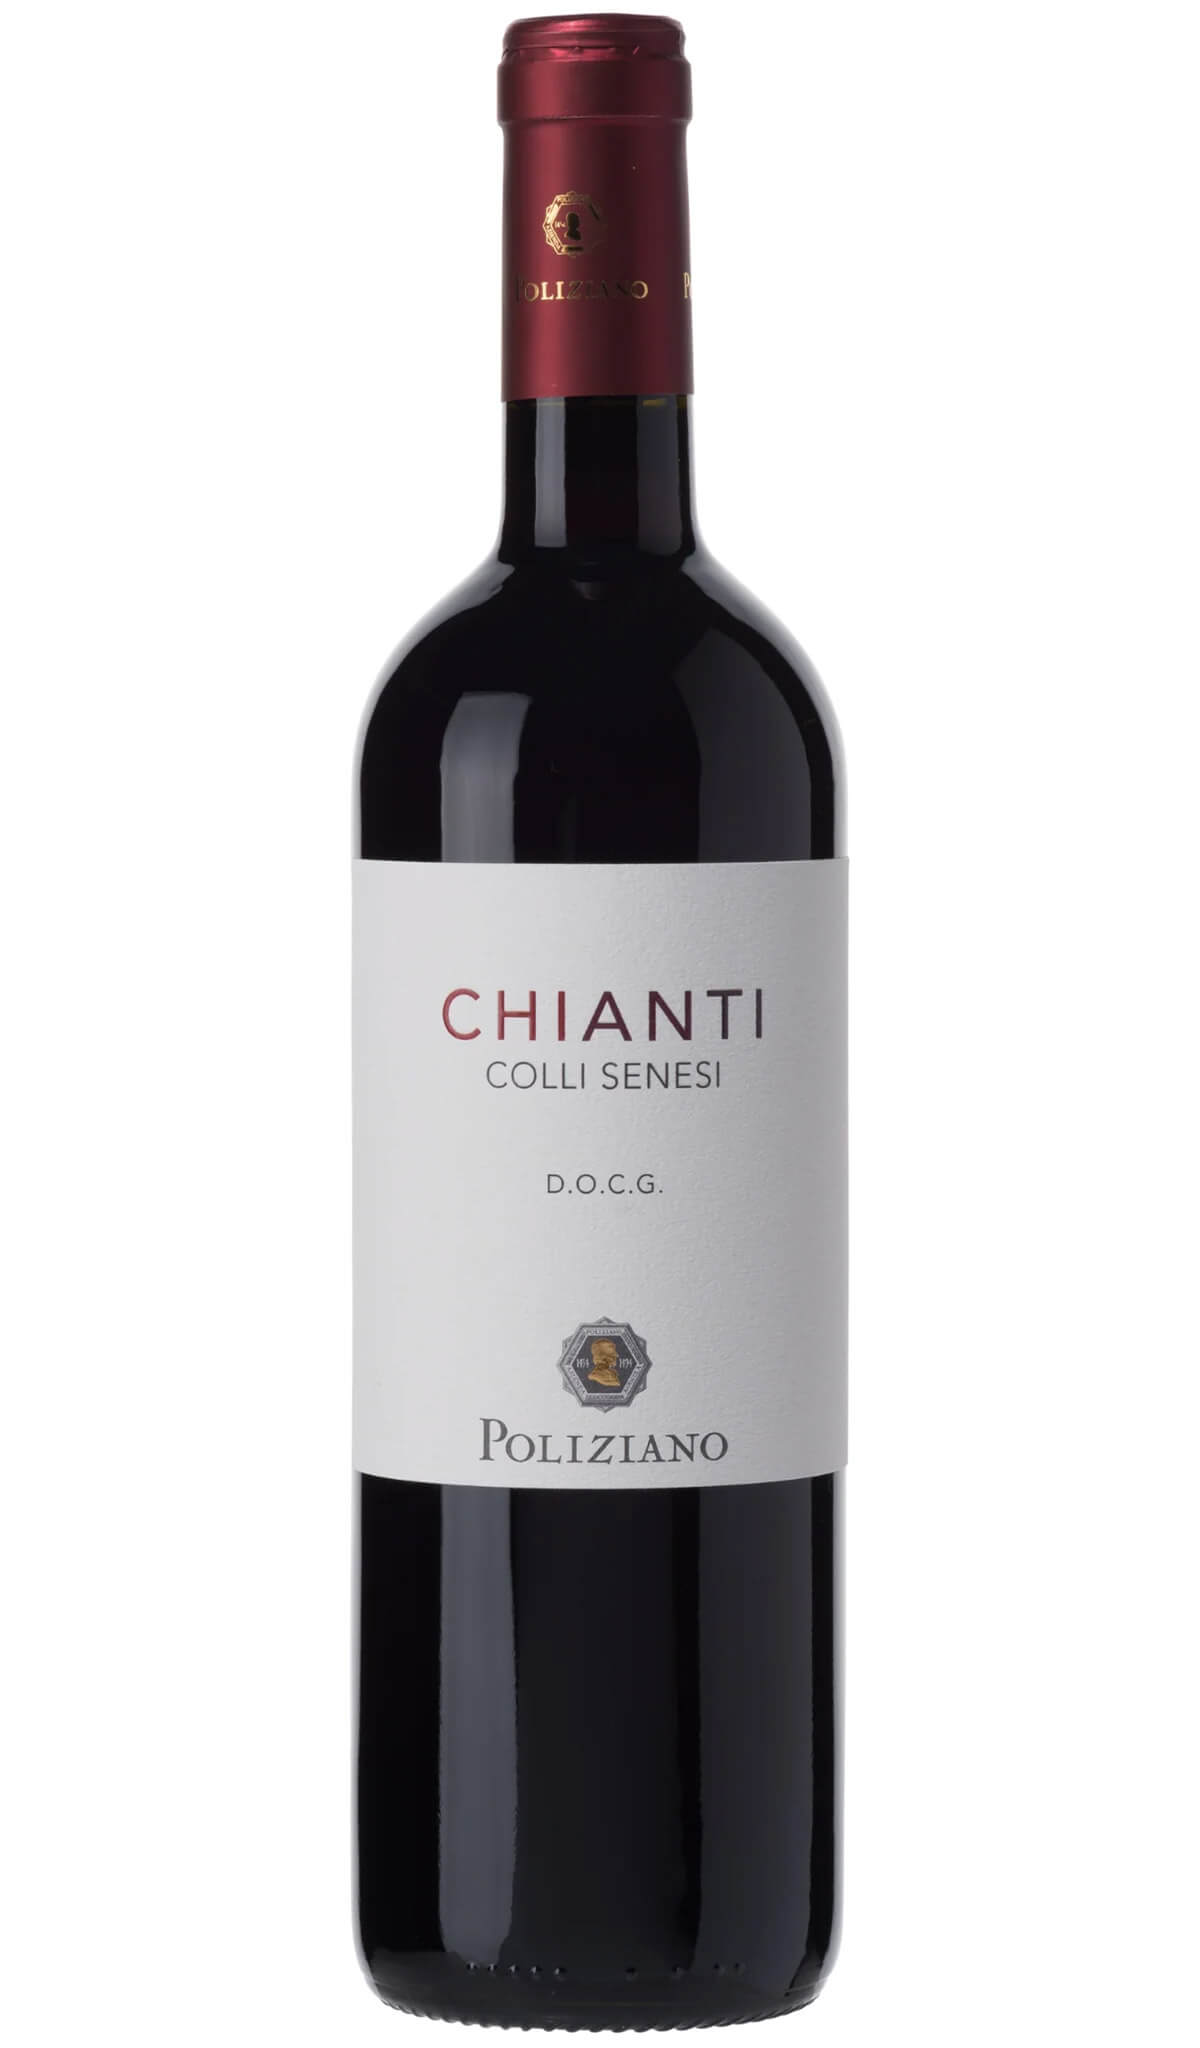 Find out more, explore the range and buy Poliziano Colli Senesi Chianti DOCG 2021 (Italy) available online at Wine Sellers Direct - Australia's independent liquor specialists.